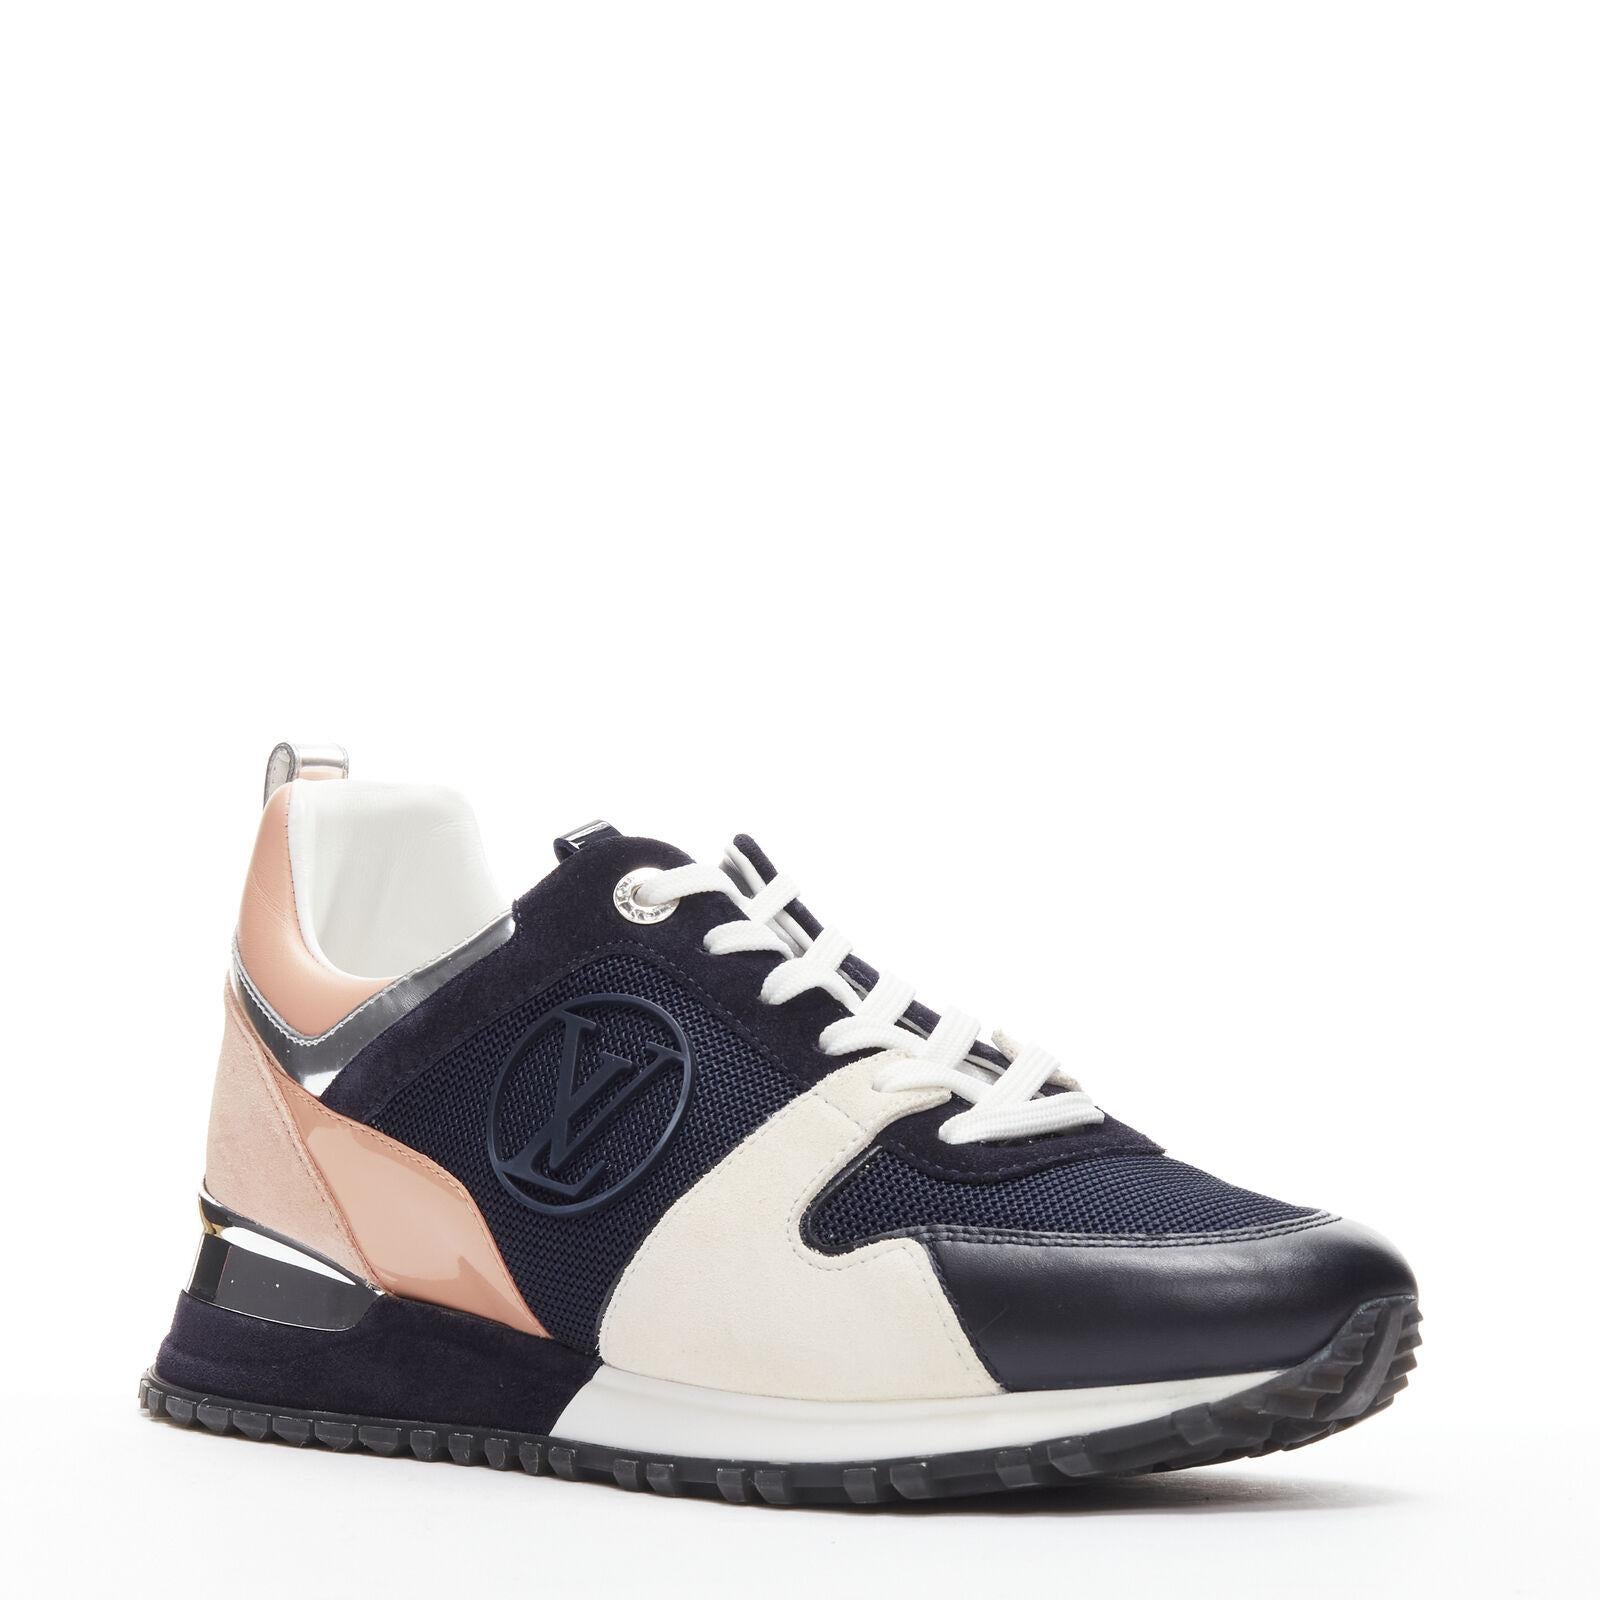 LOUIS VUITTON Run Away pink navy silver LV logo low top sneakers EU38 US8
Reference: AAWC/A00138
Brand: Louis Vuitton
Designer: Nicolas Ghesquiere
Model: Run Away
Material: Suede, Fabric
Color: Navy, Pink
Pattern: Solid
Closure: Lace Up
Lining: